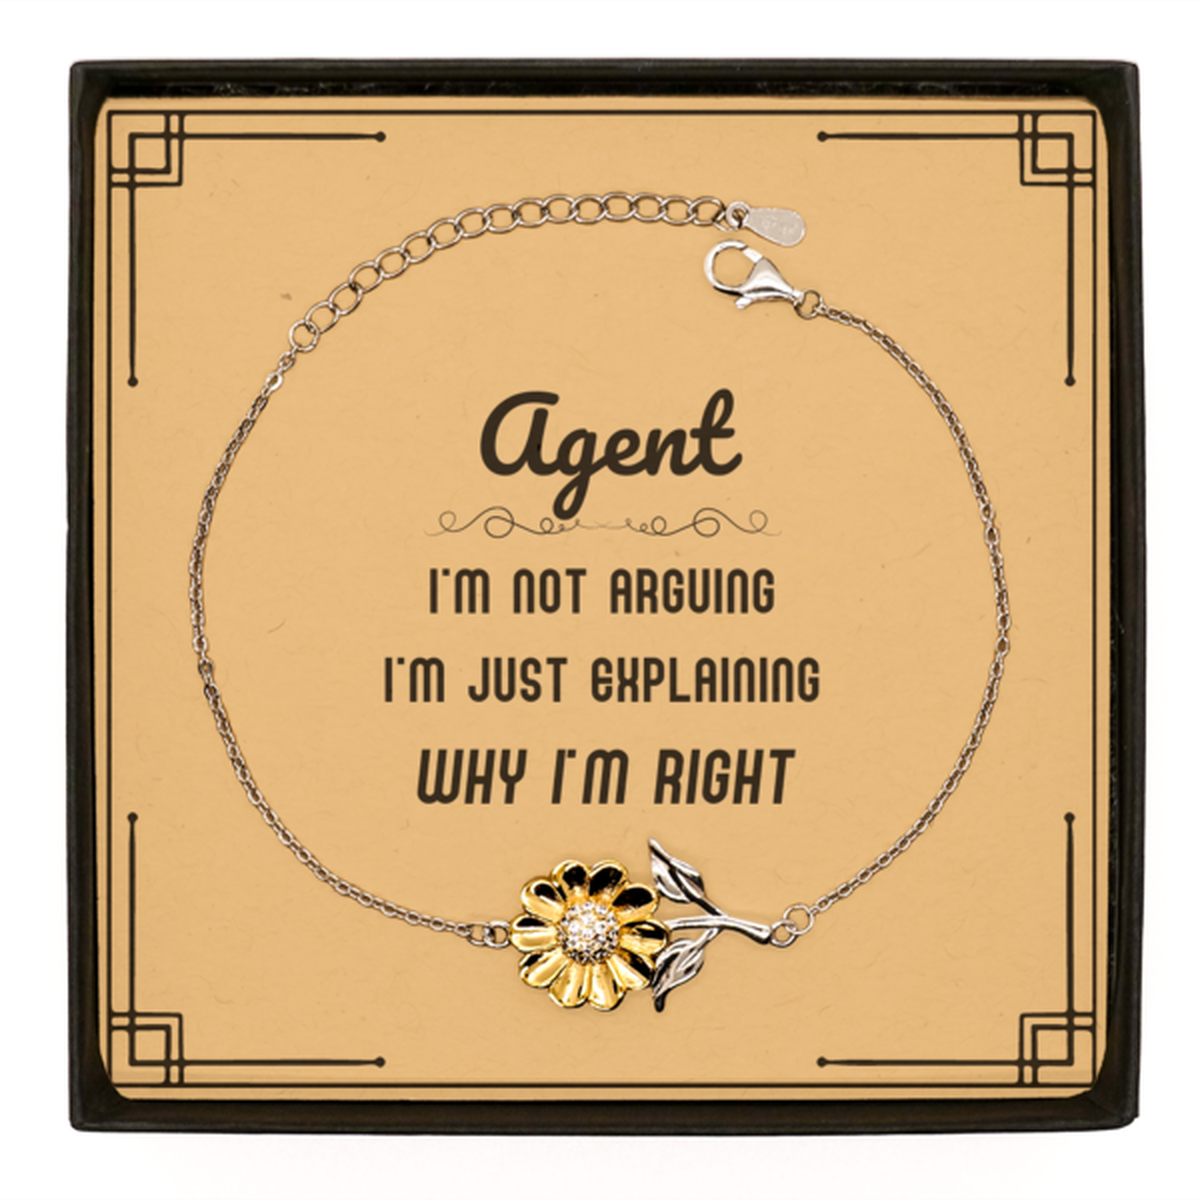 Agent I'm not Arguing. I'm Just Explaining Why I'm RIGHT Sunflower Bracelet, Funny Saying Quote Agent Gifts For Agent Message Card Graduation Birthday Christmas Gifts for Men Women Coworker